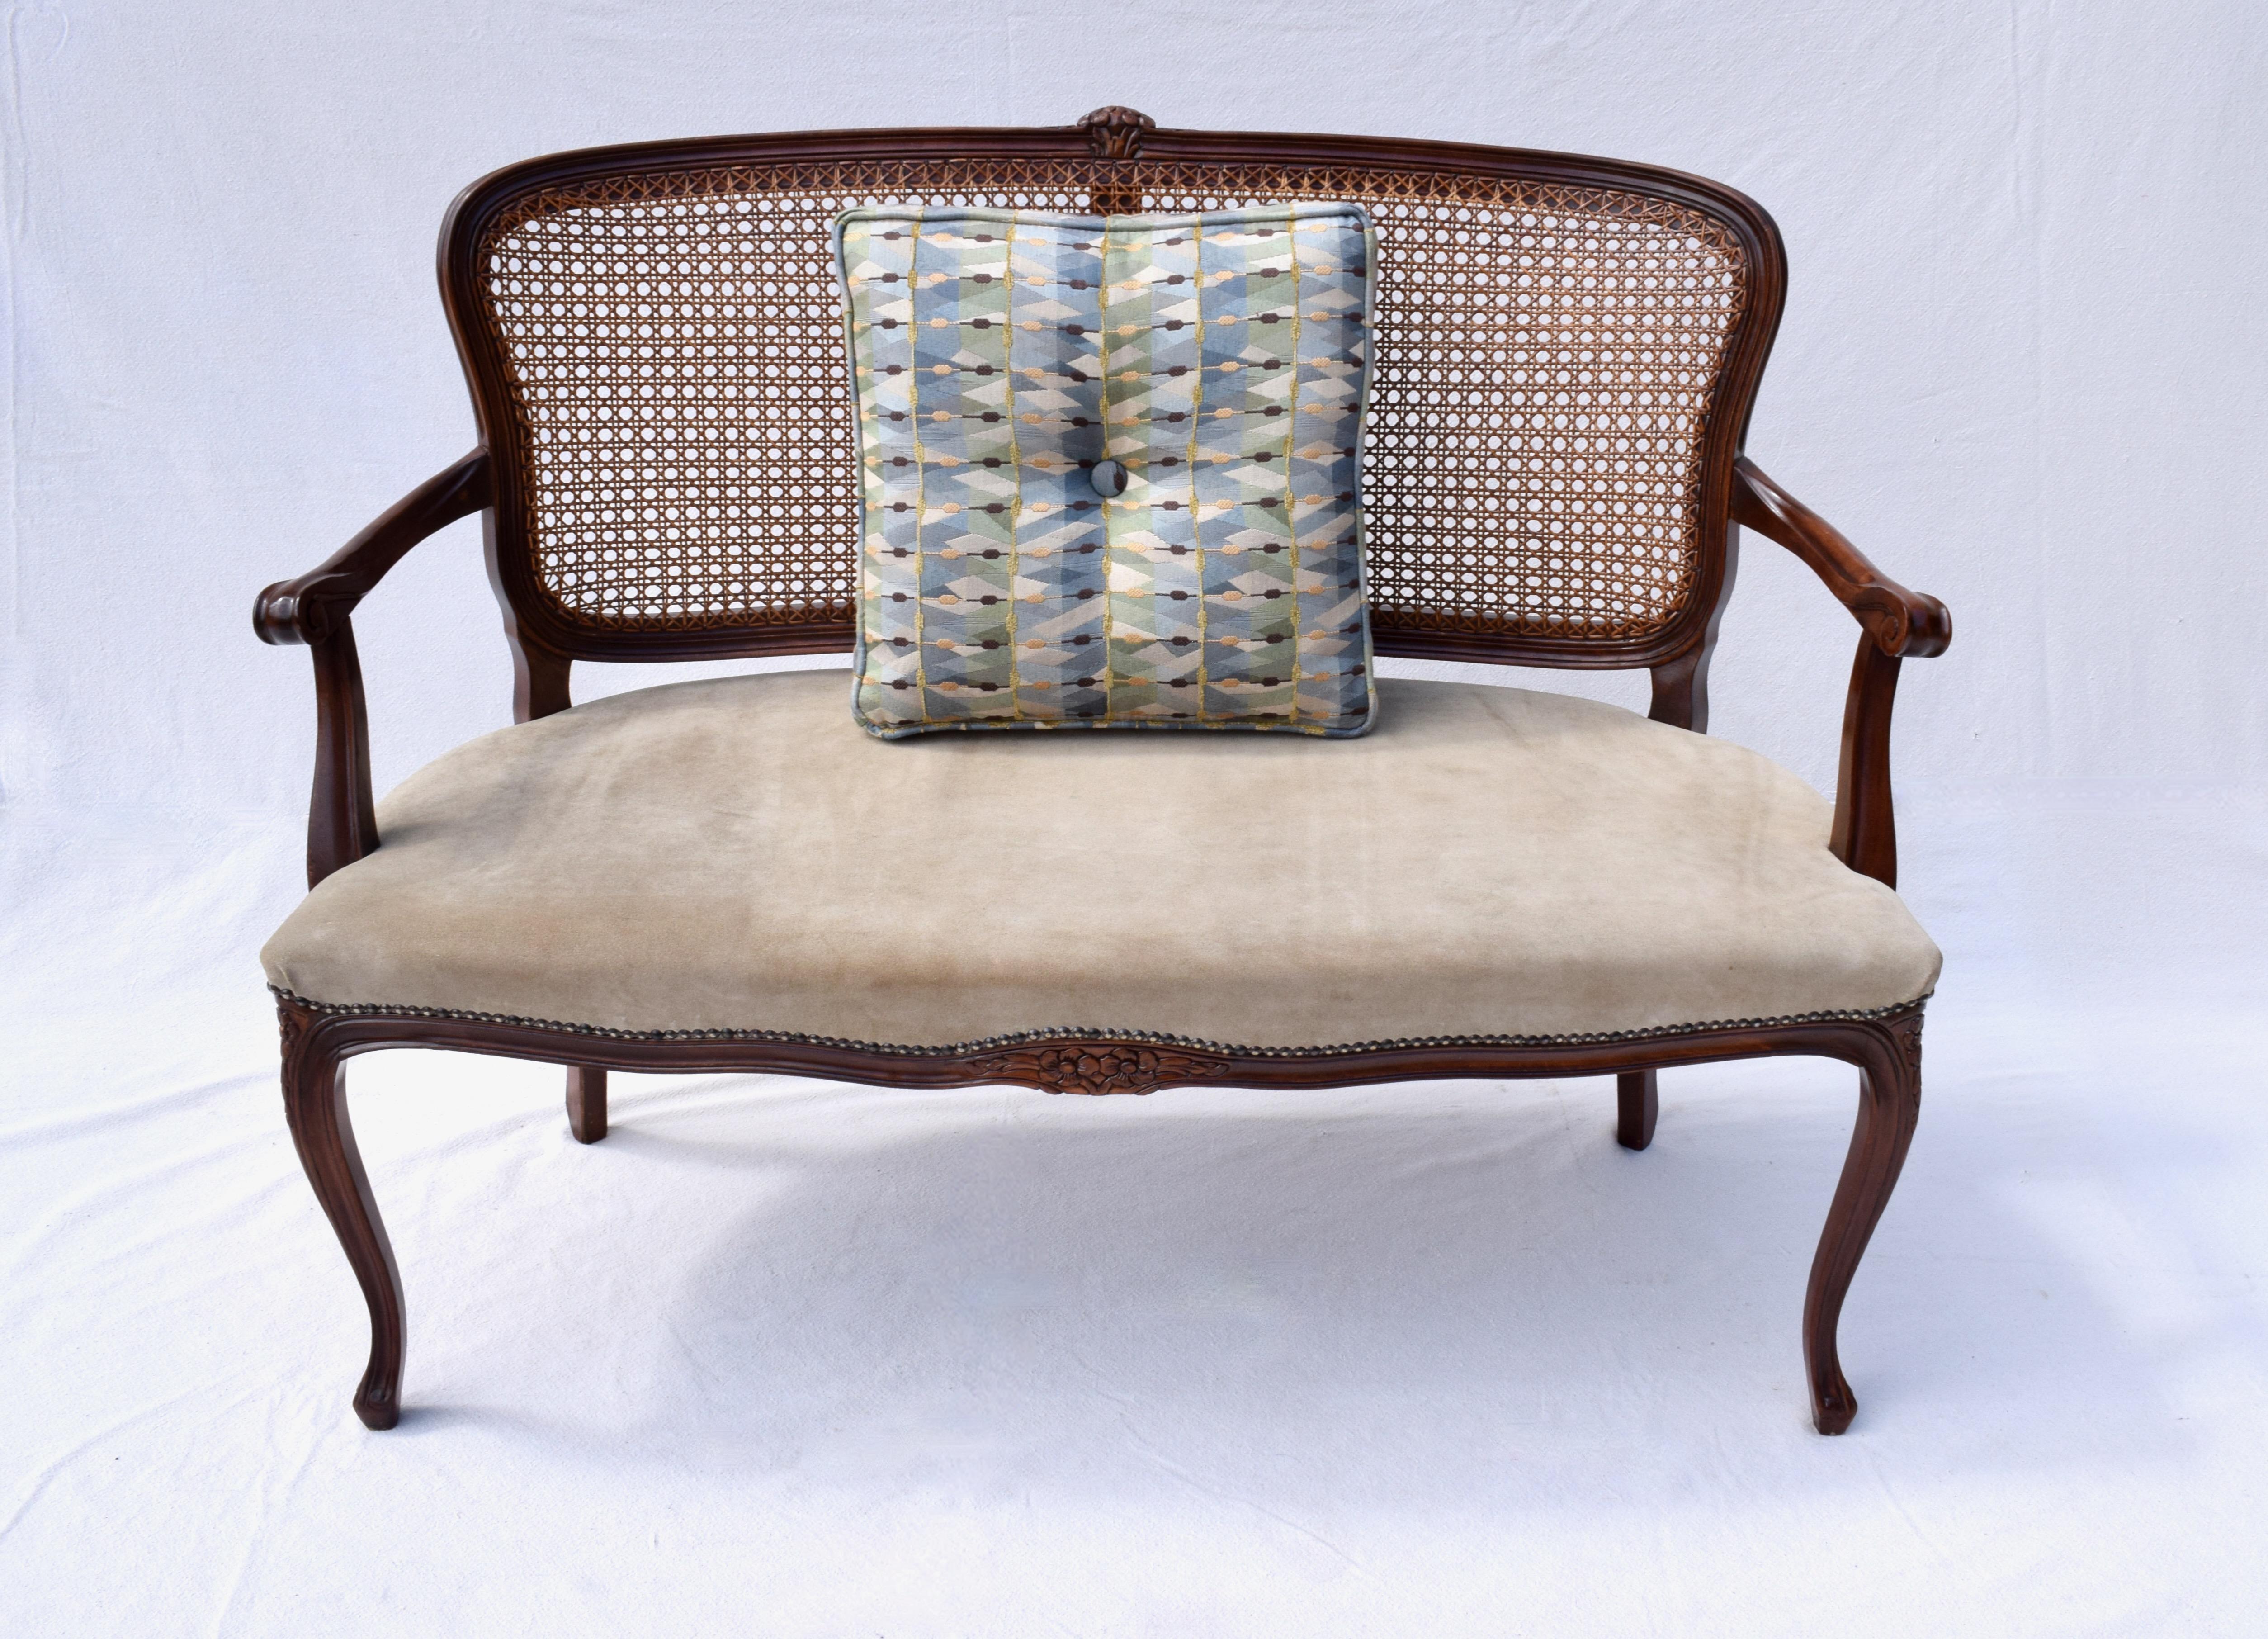 An exquisite Louis XV style French caned Mahogany settee or loveseat upholstered in soft suede with brass tack detailing. Circa 1980's made in Italy. Seat: 19